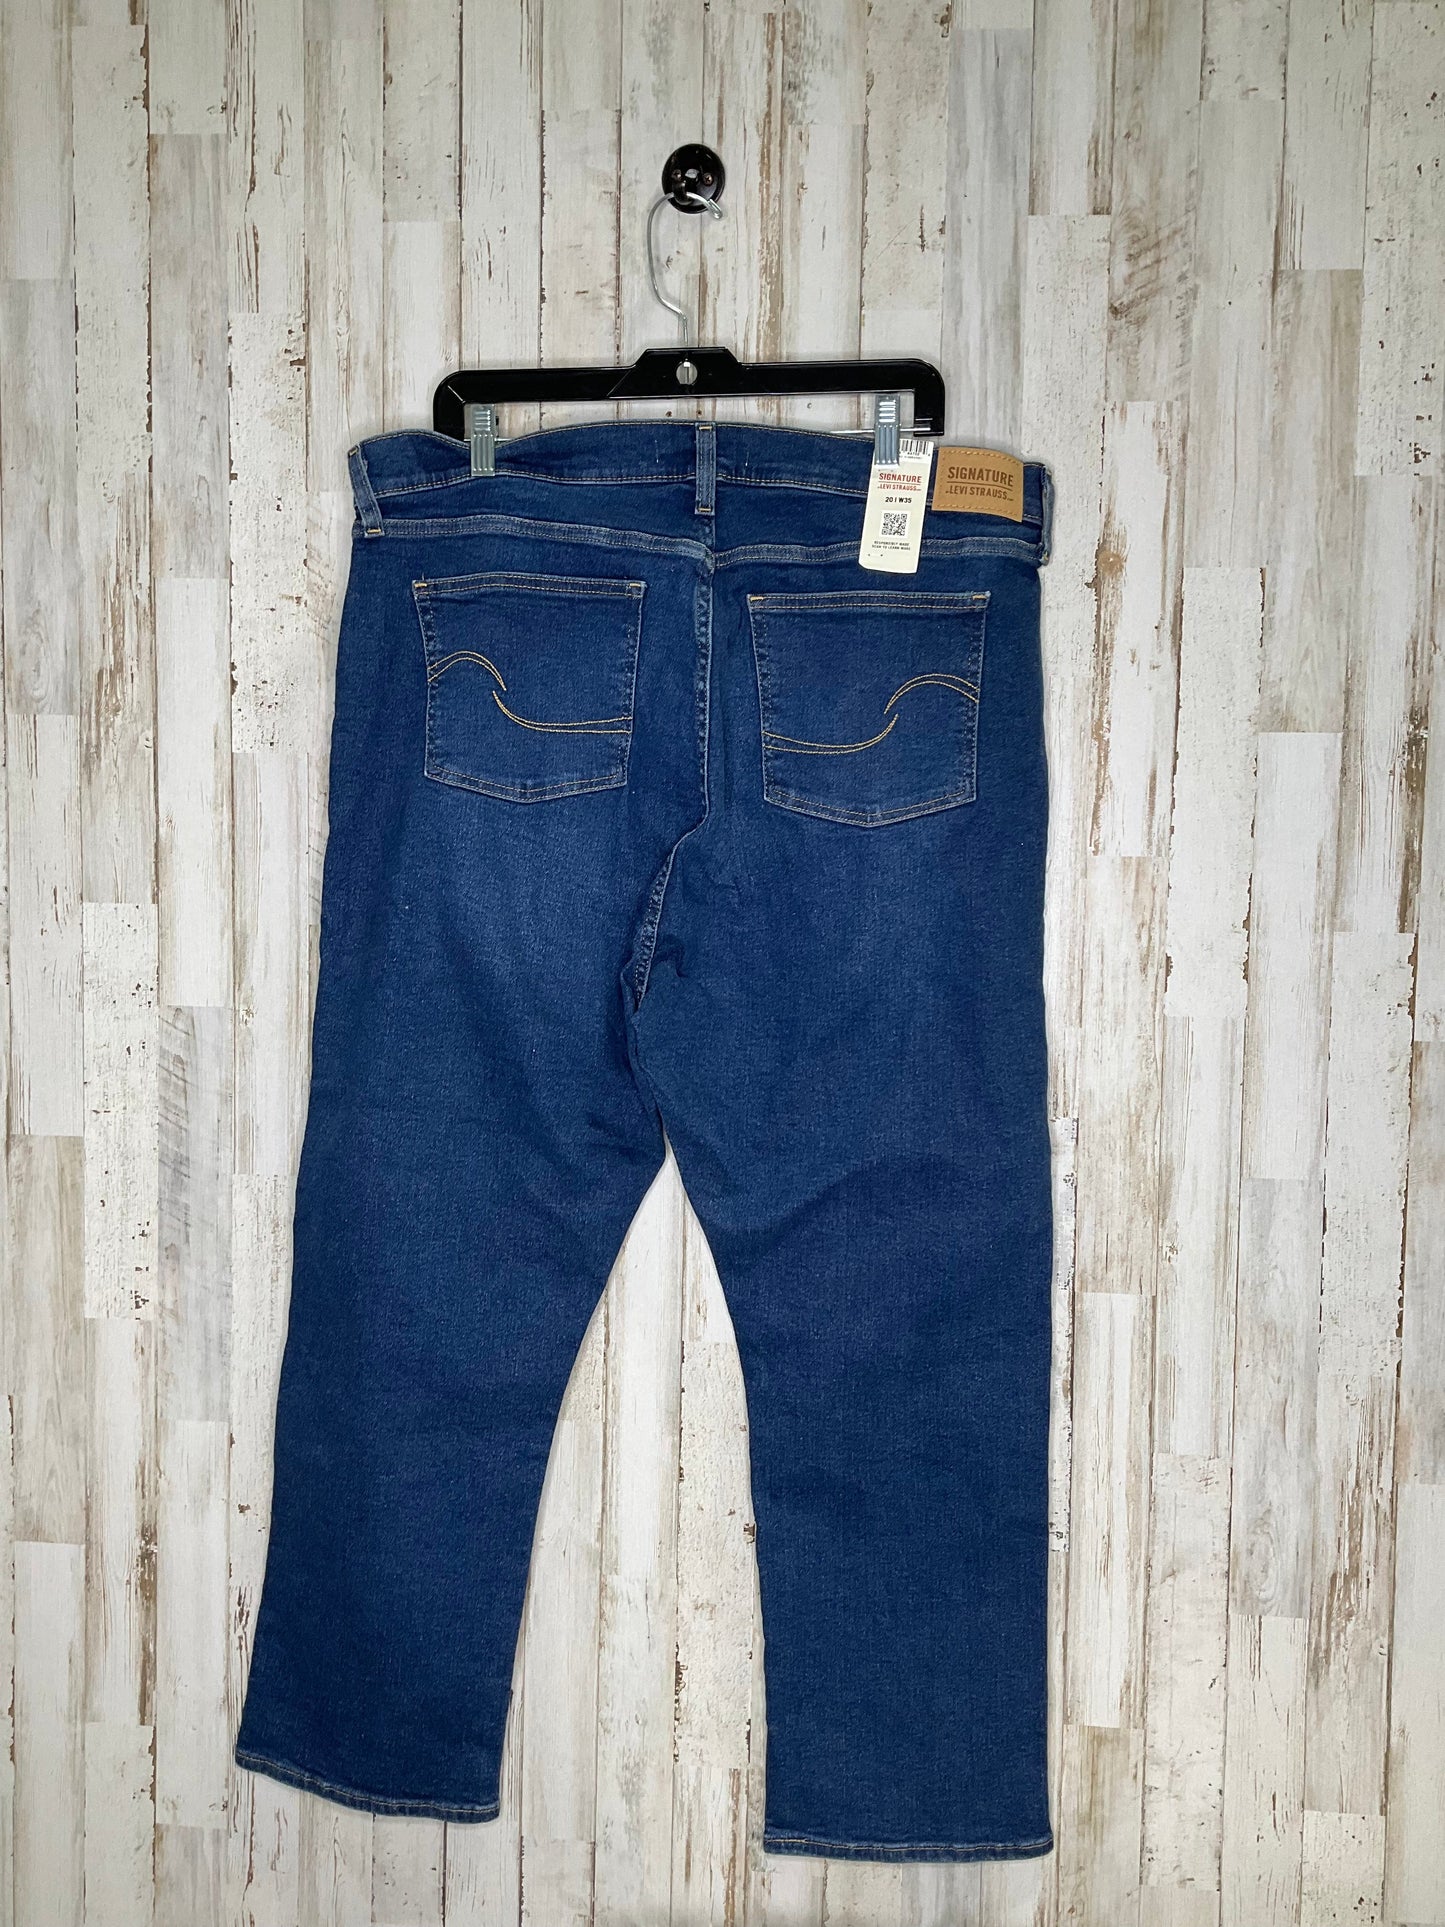 Jeans Skinny By Levis  Size: 20